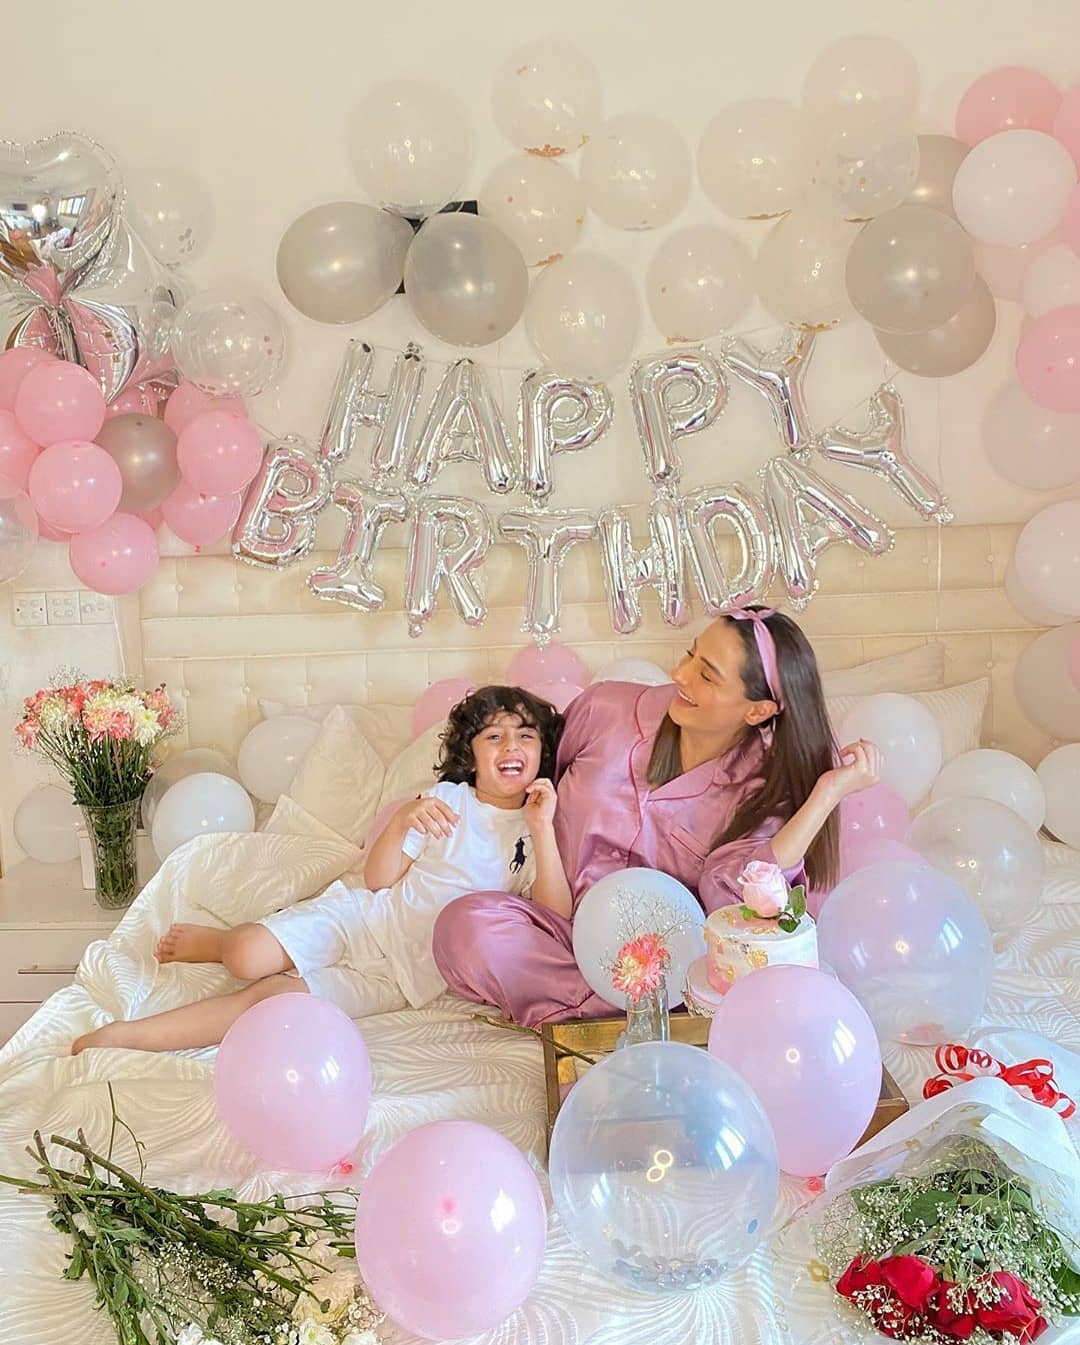 Momal Sheikh with Family - 10 Adorable Pictures